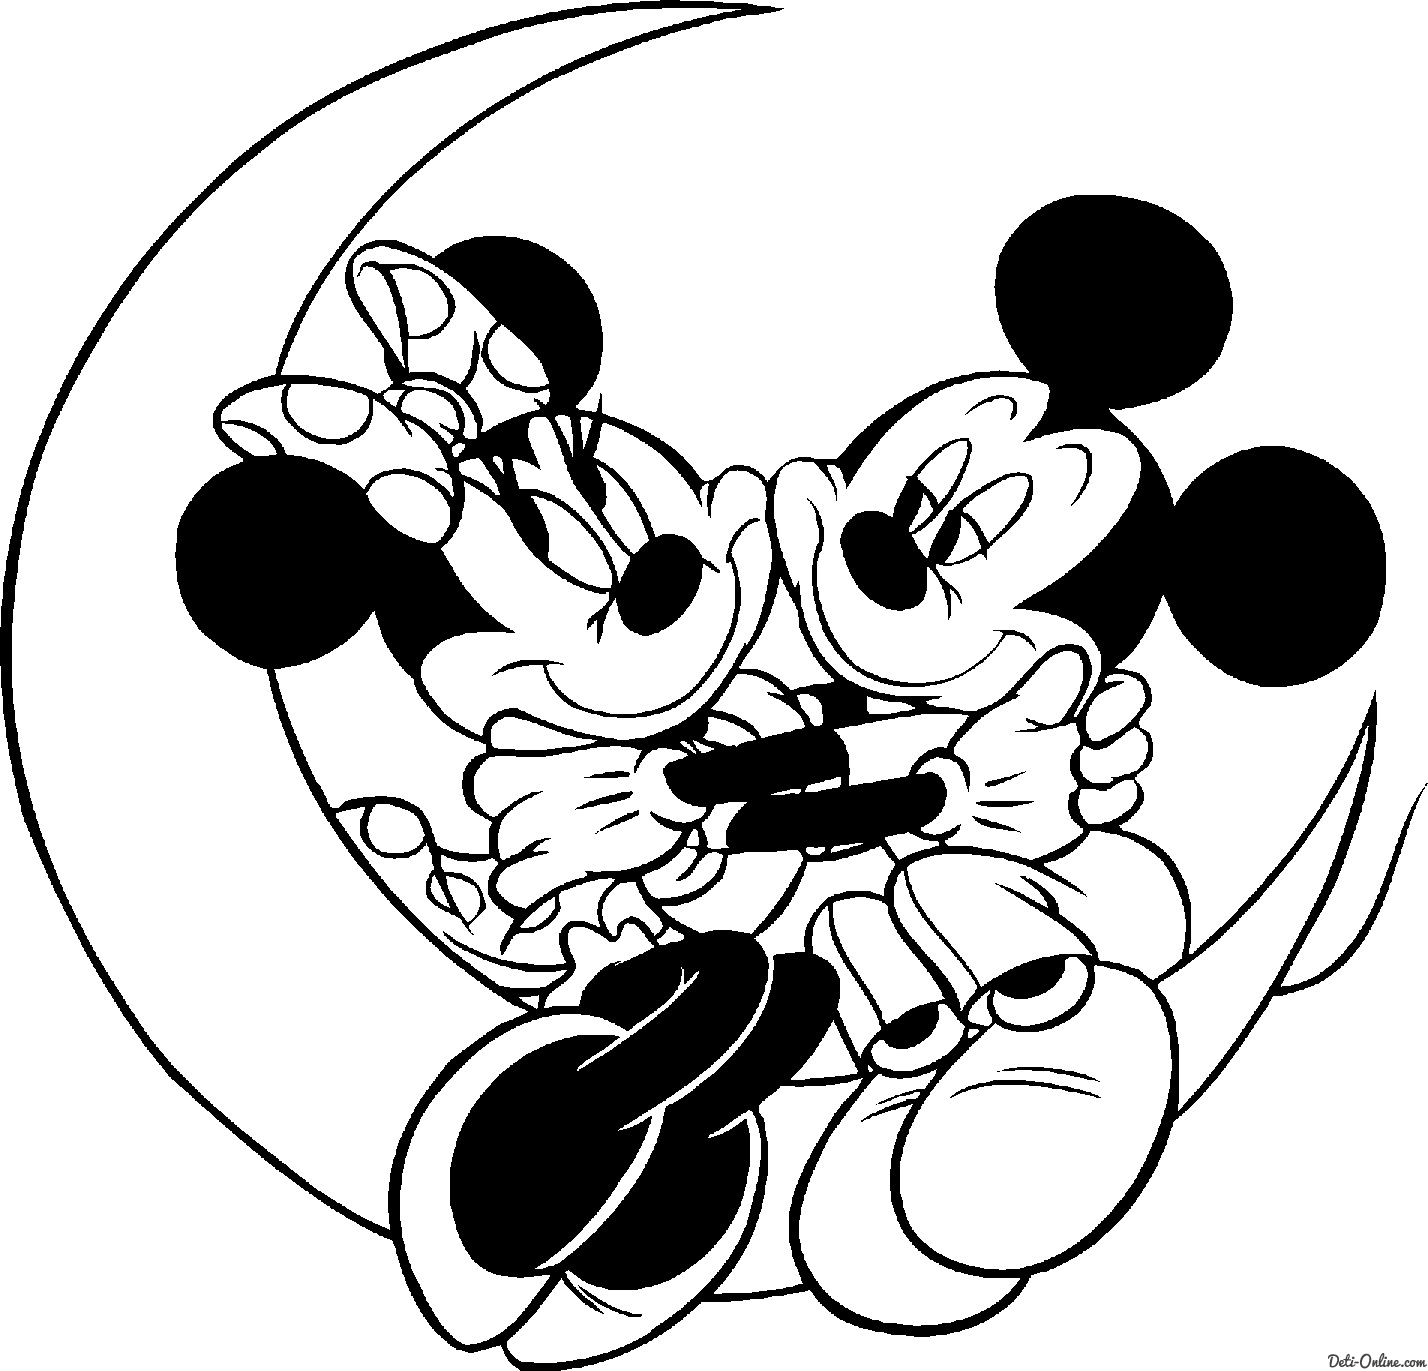 Black And White Mickey Mouse And Minnie Mouse Wallpaper - Id #2916 ...